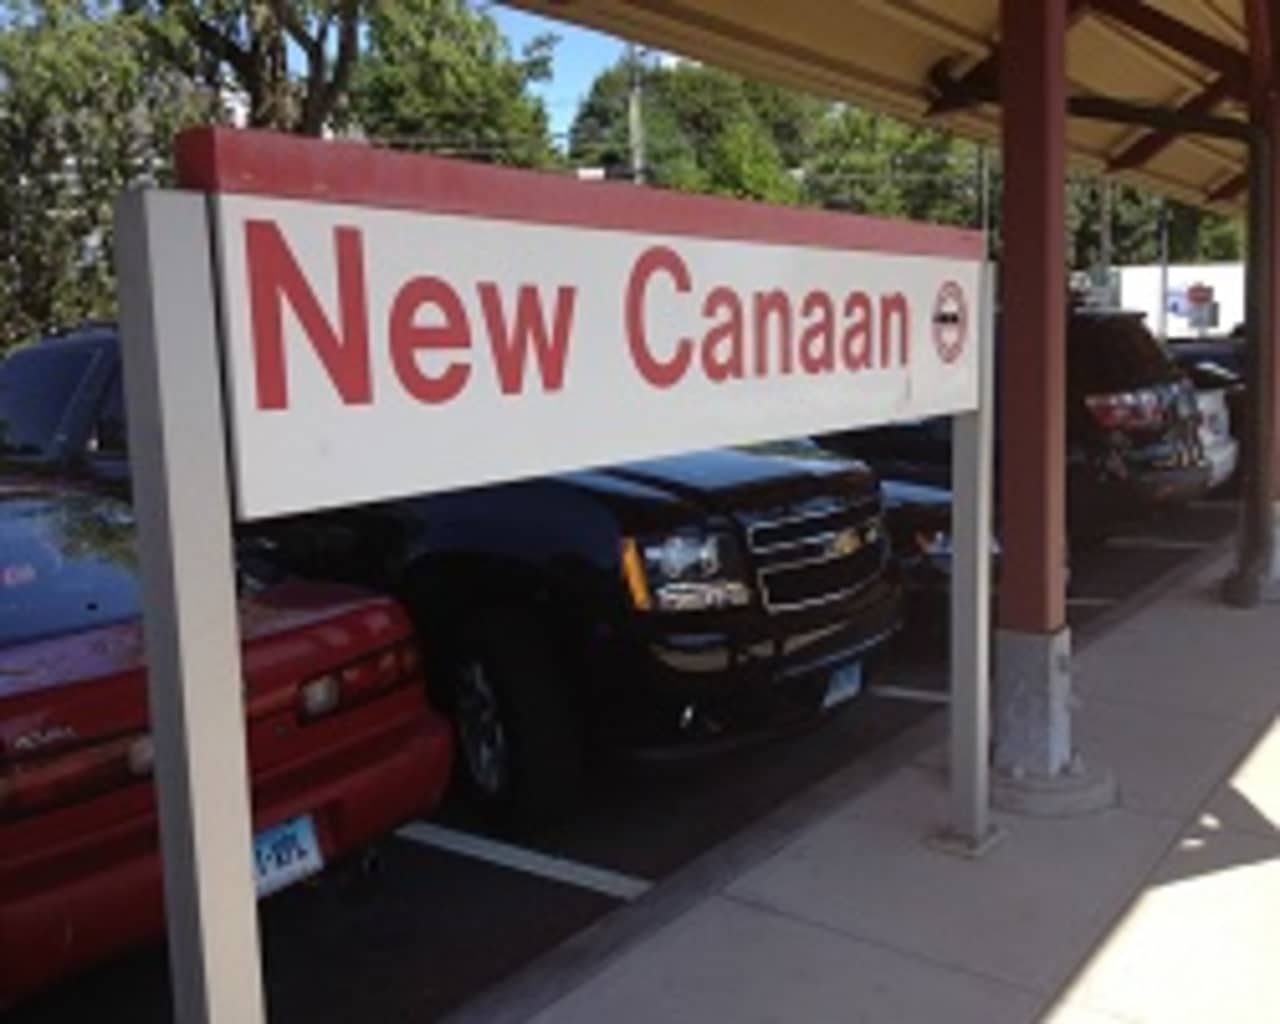 The lobby of the New Canaan train station will be closed between 10:30 a.m. and 7 p.m. from Tuesday, March 18 through Saturday, March 22 for painting. 